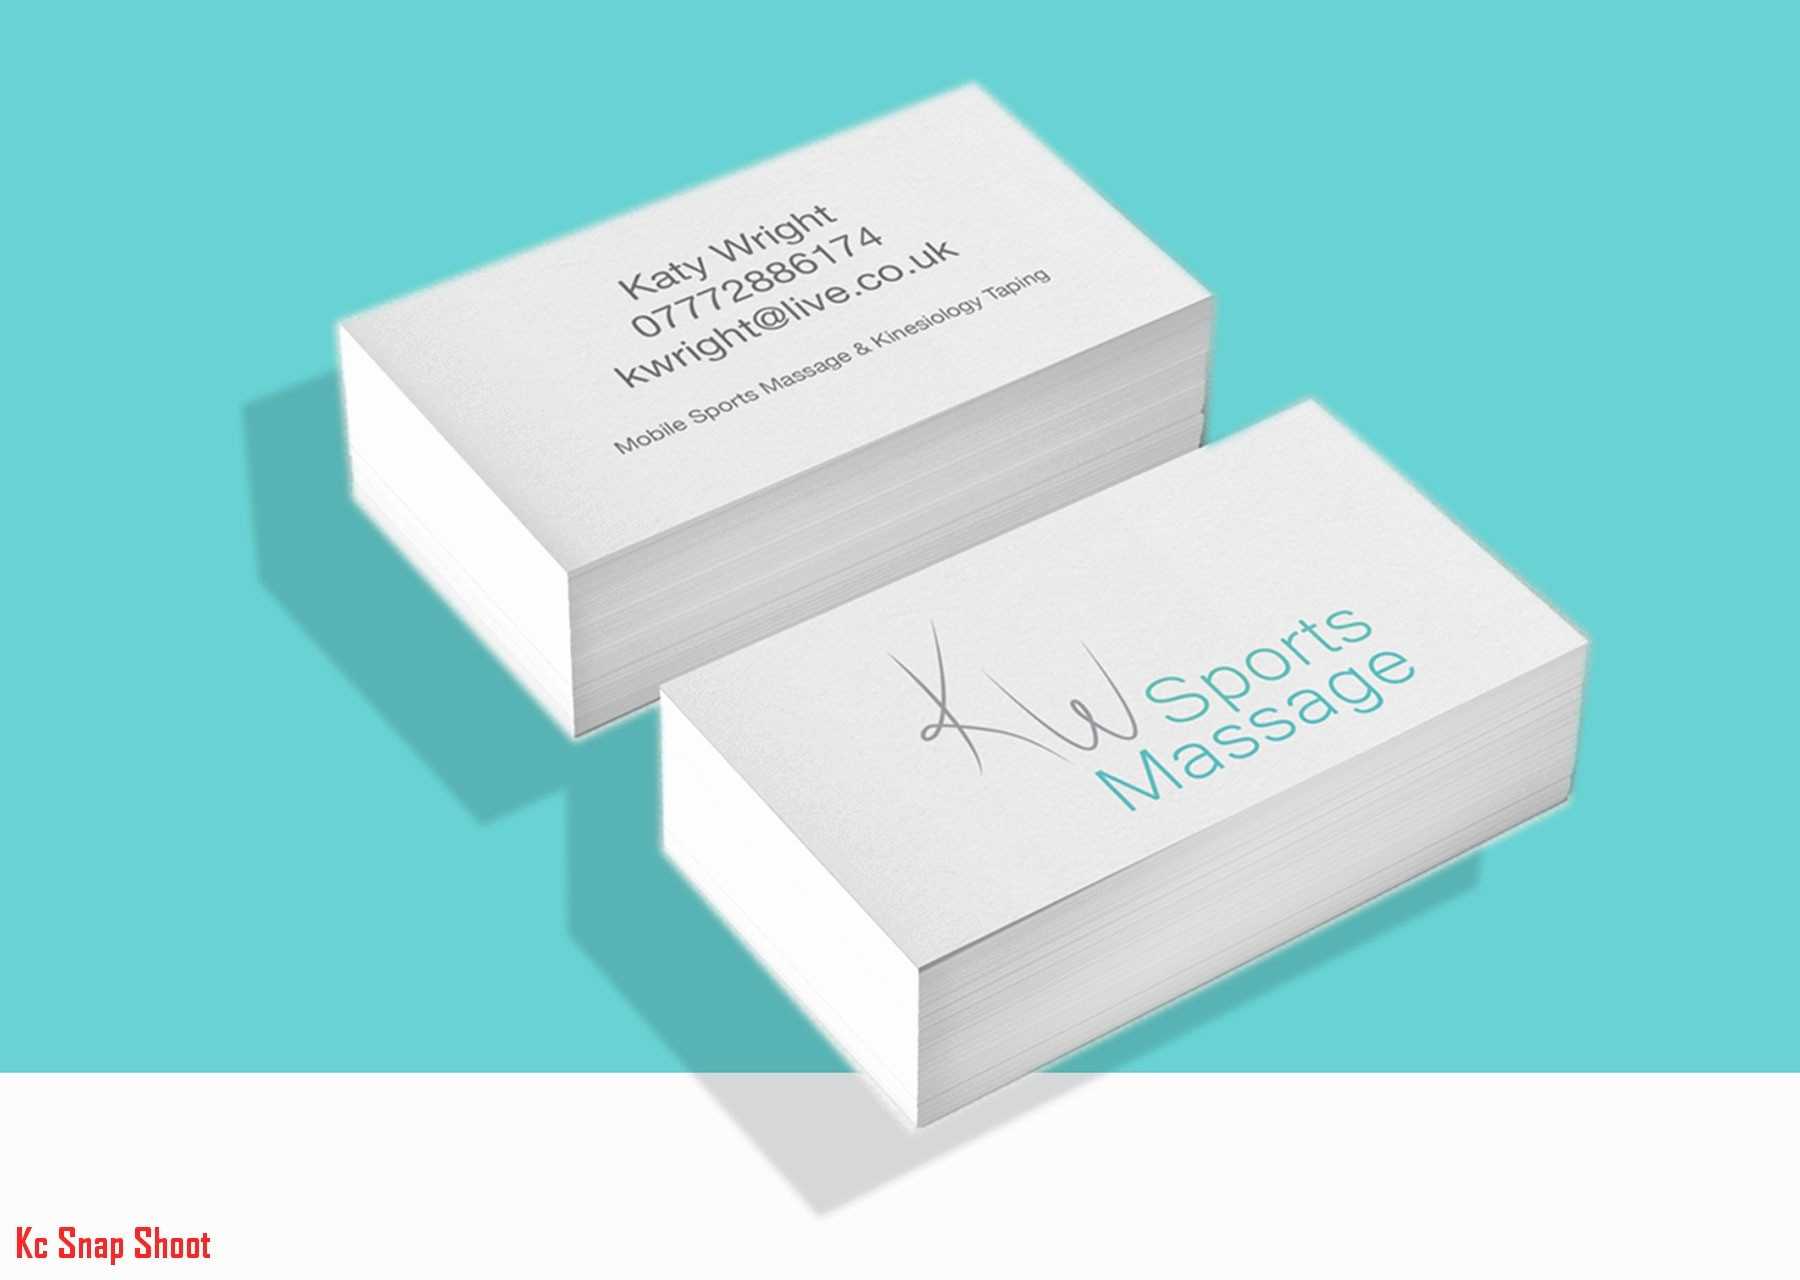 Massage Therapy Business Card Templates Free Dance Cards Intended For Massage Therapy Business Card Templates